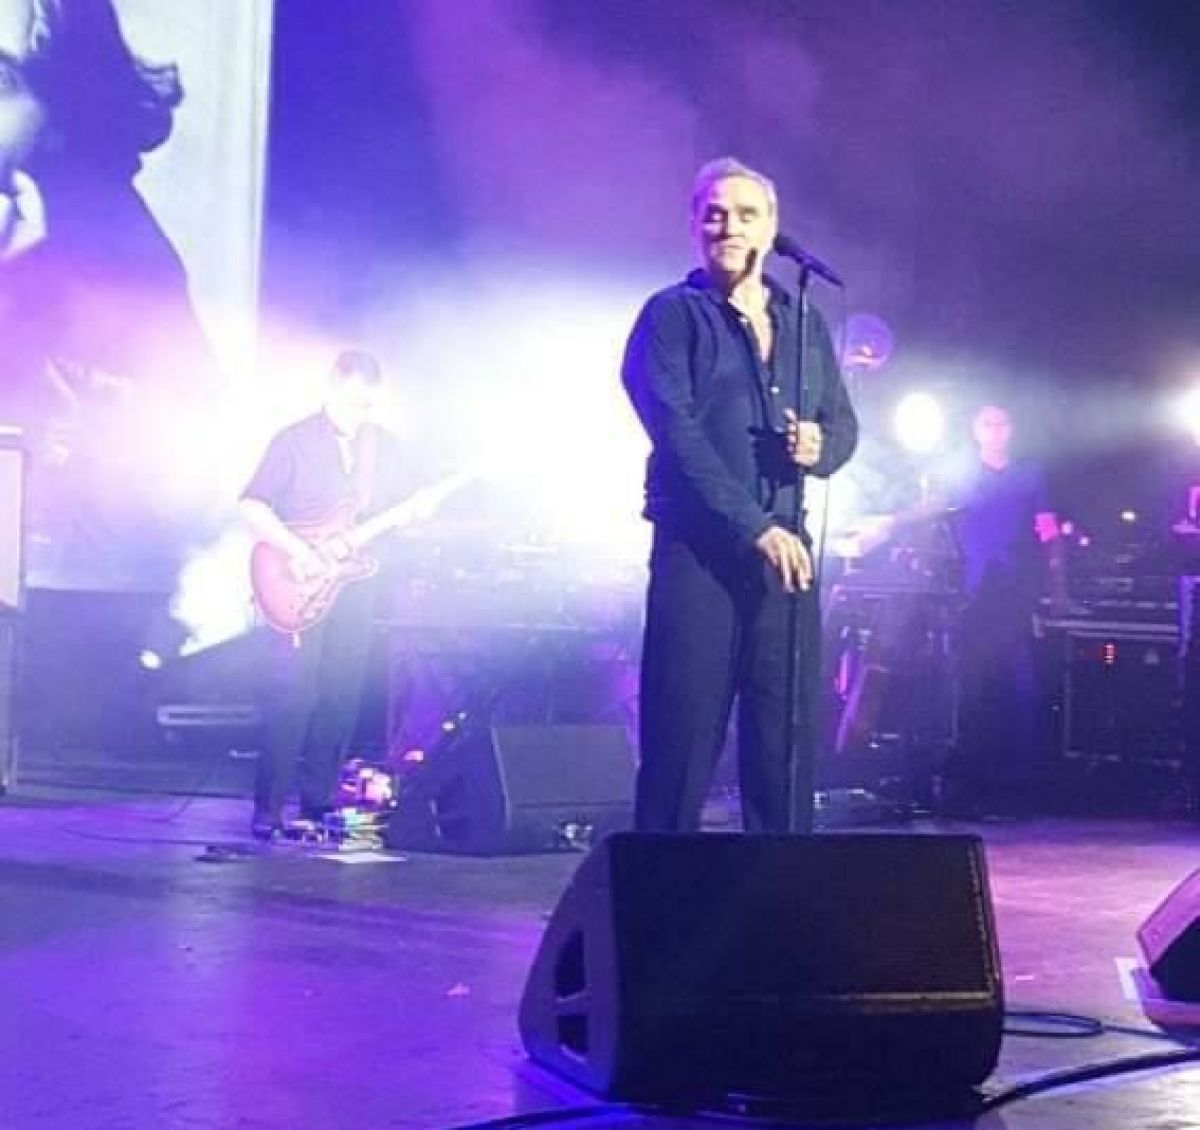 Live review: A triumphant return to Manchester for Morrissey